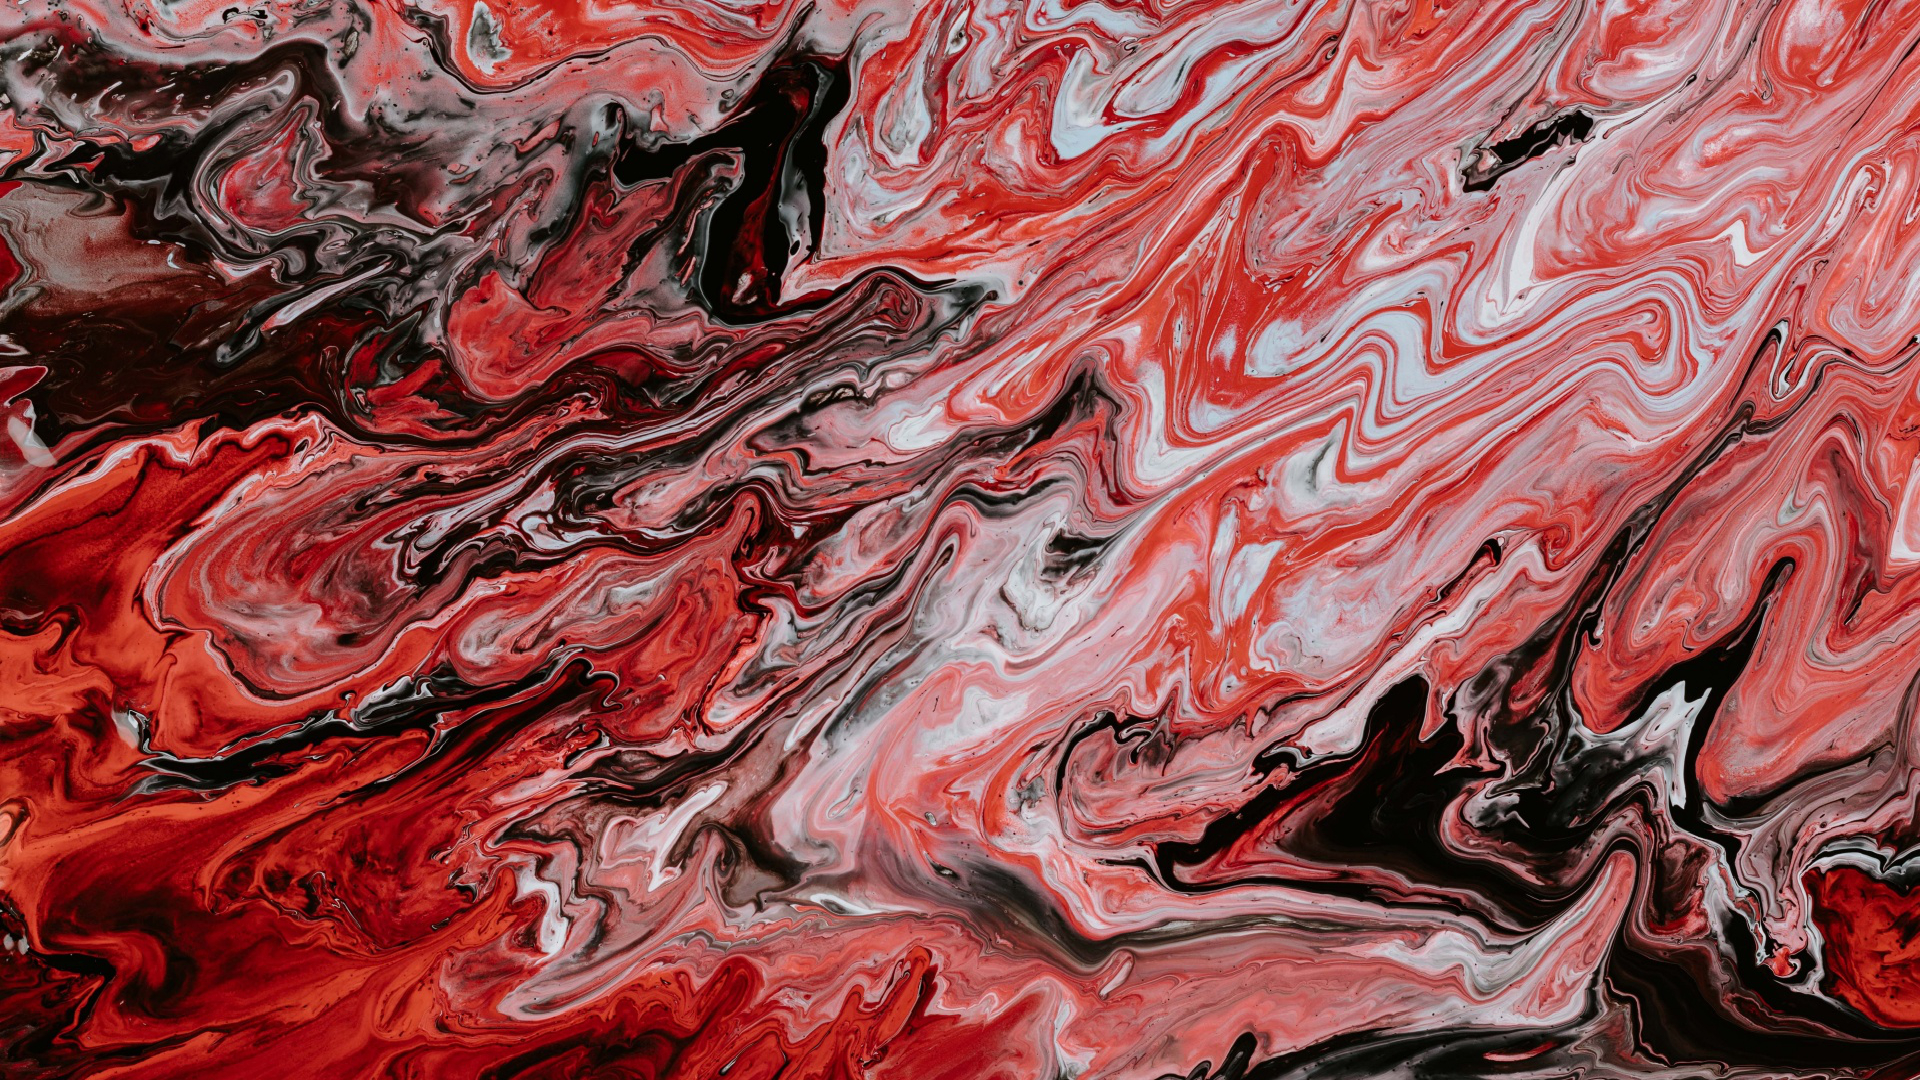 Abstract Art Black And Red - HD Wallpaper 